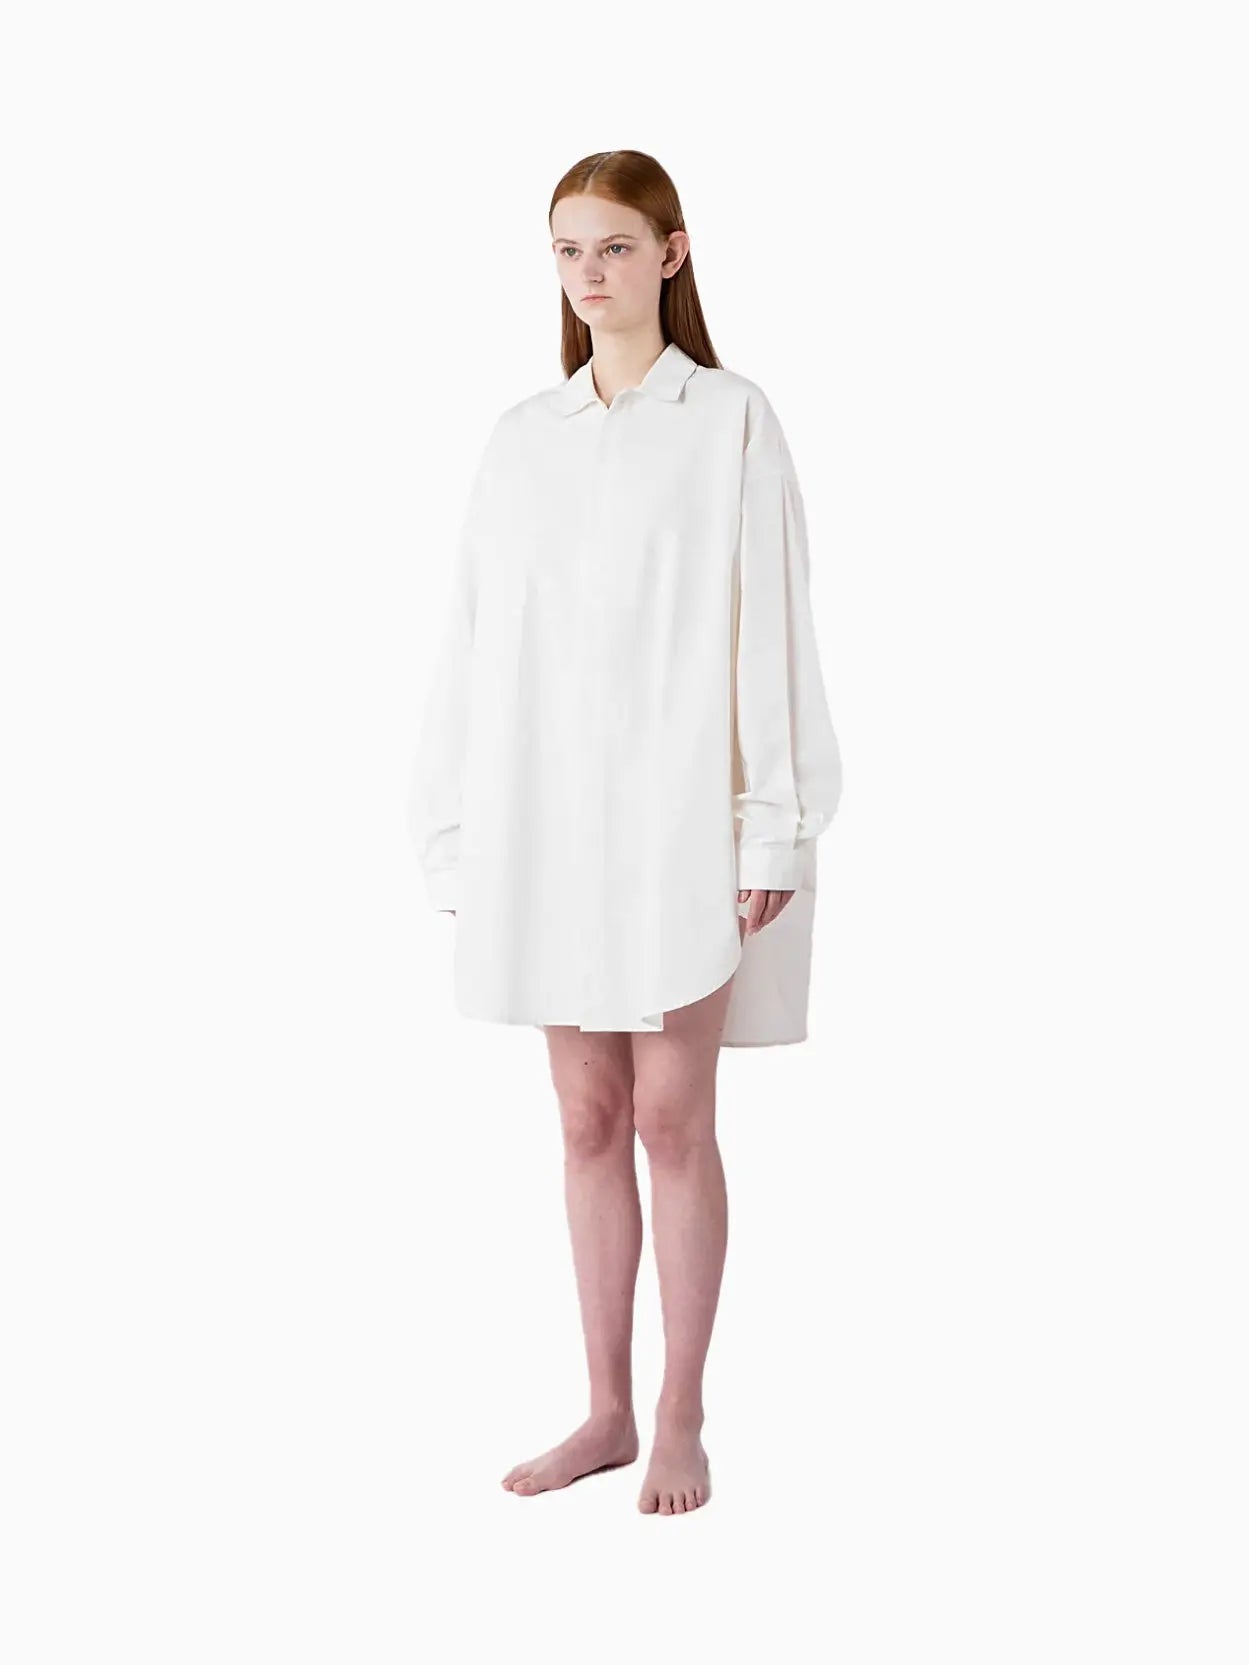 A white button-up shirt with long sleeves, a collar, and a loose, slightly oversized fit. The Mega Overshirt White has a minimalist design and appears to be made from lightweight fabric. A small tag with text is visible at the back of the collar, subtly nodding to its origins from Sunnei in Barcelona.